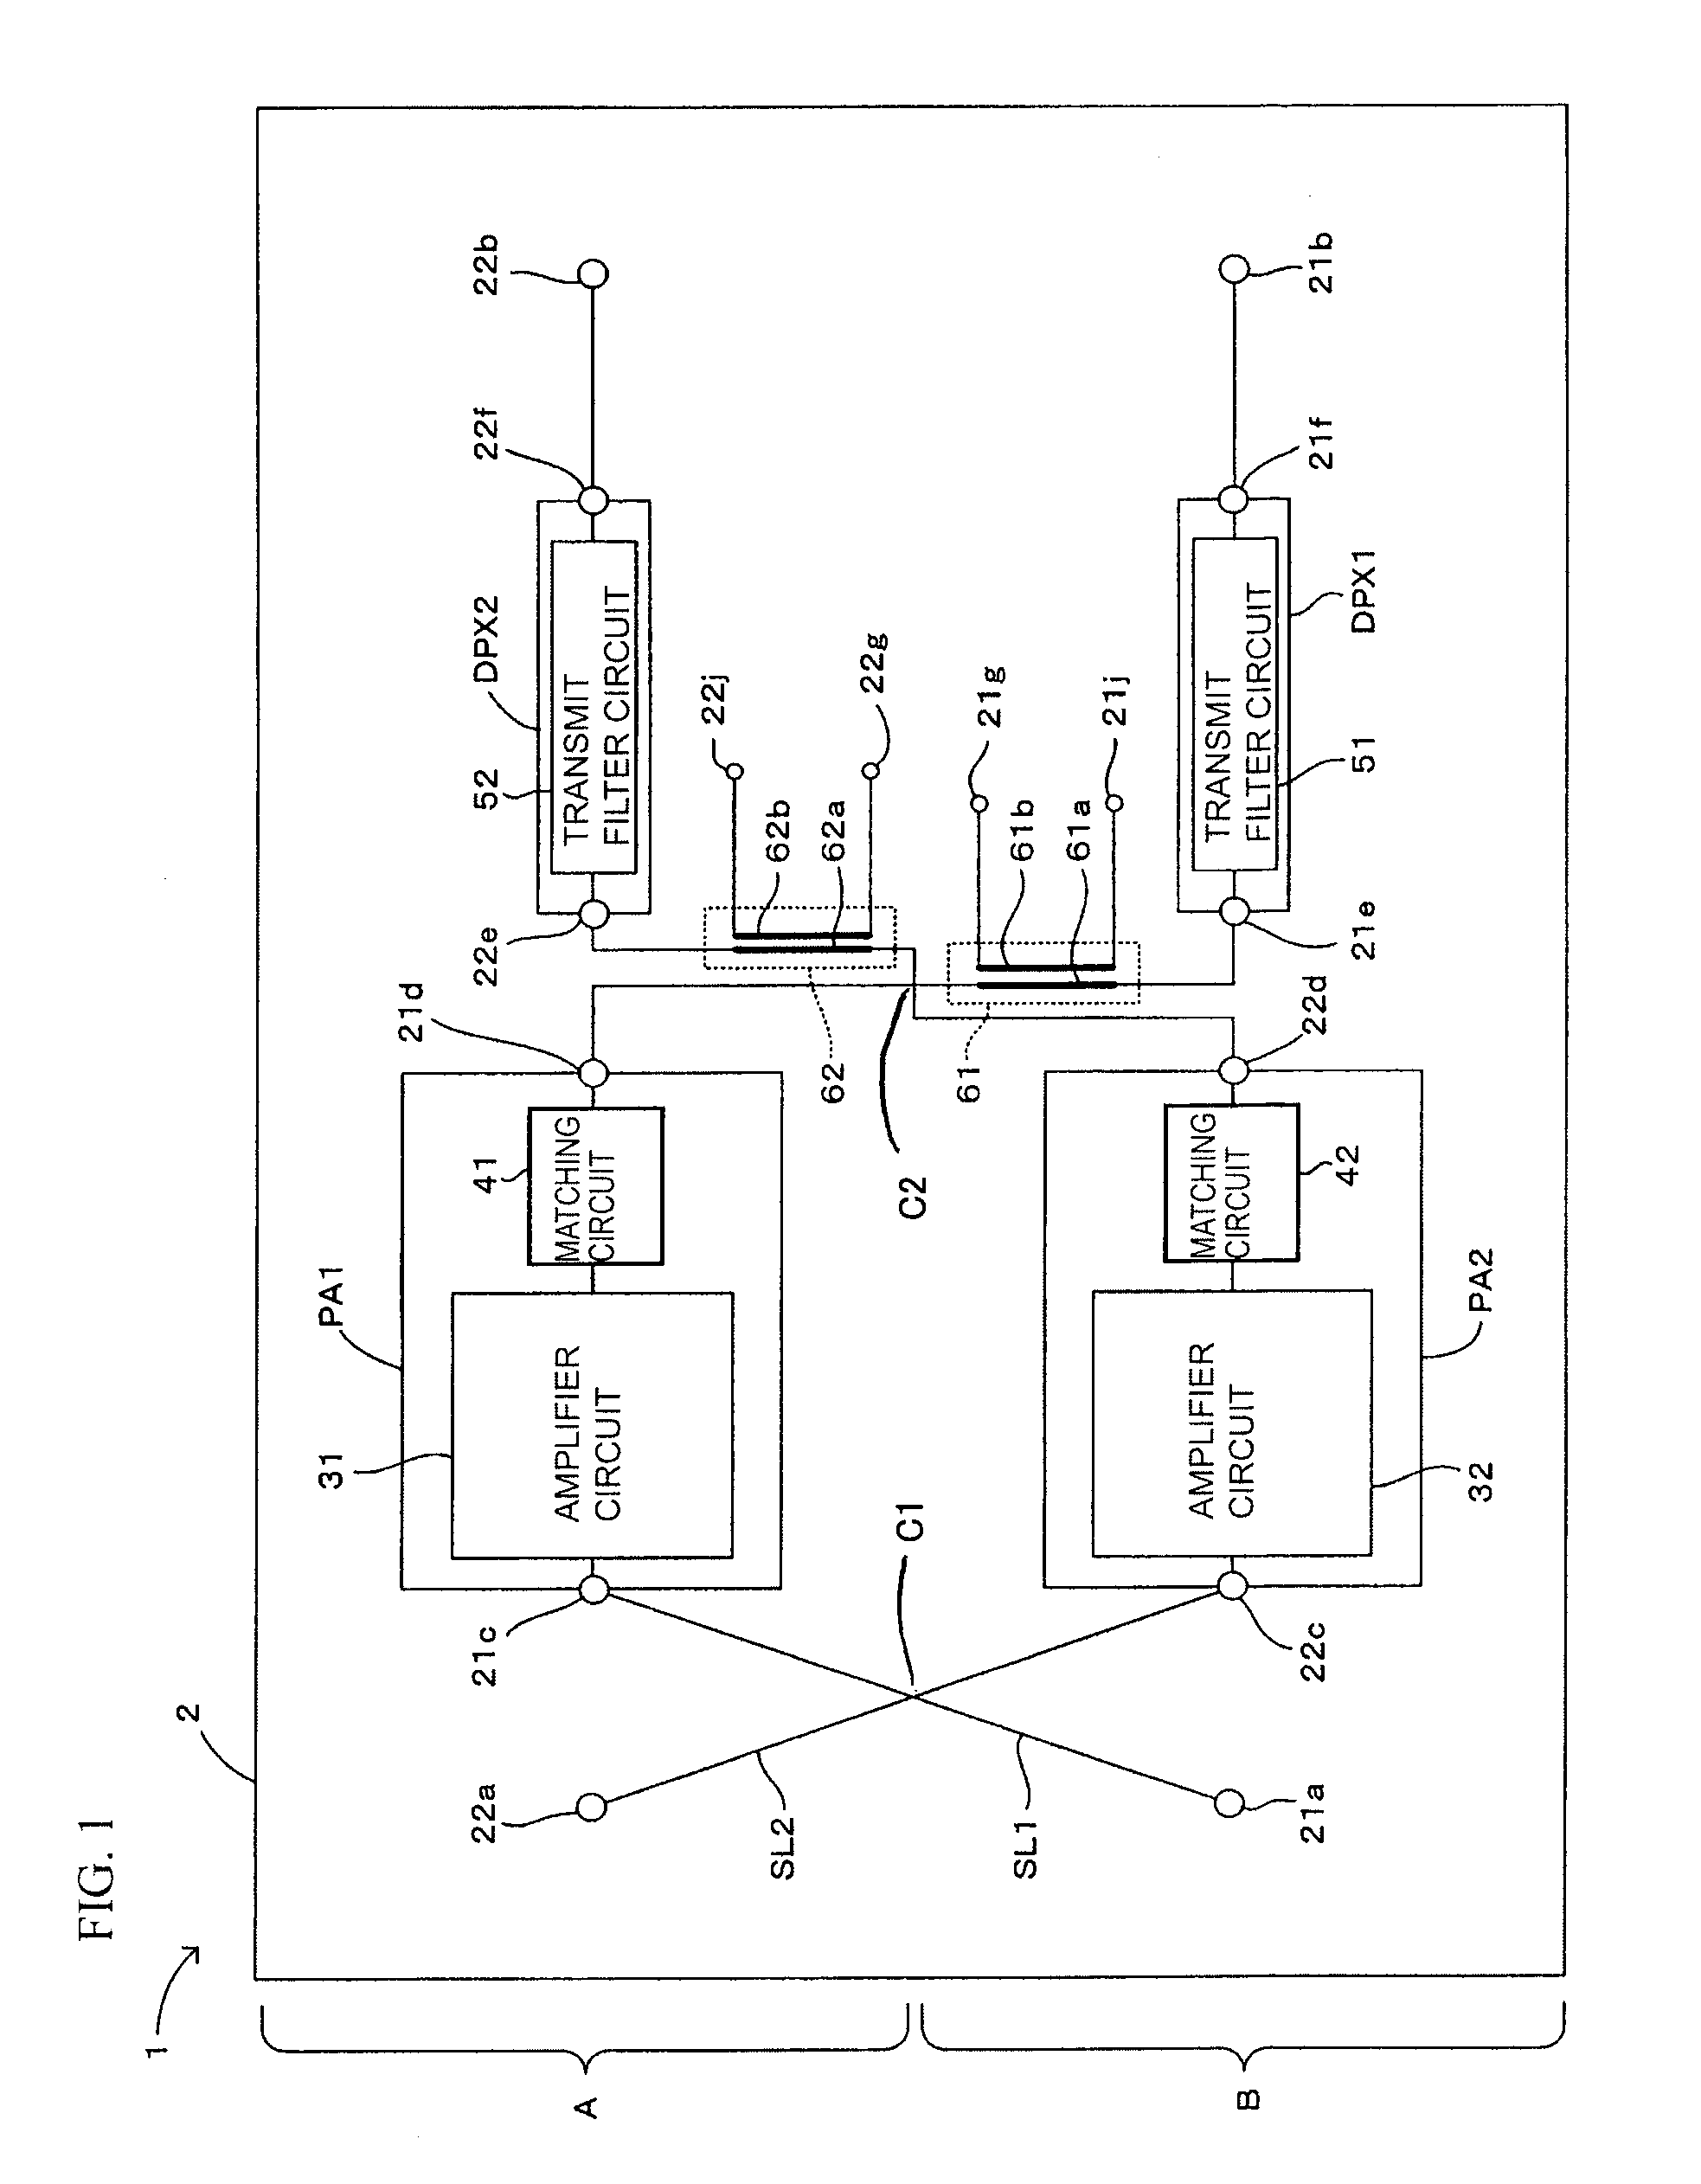 Multiband-support radio-frequency module